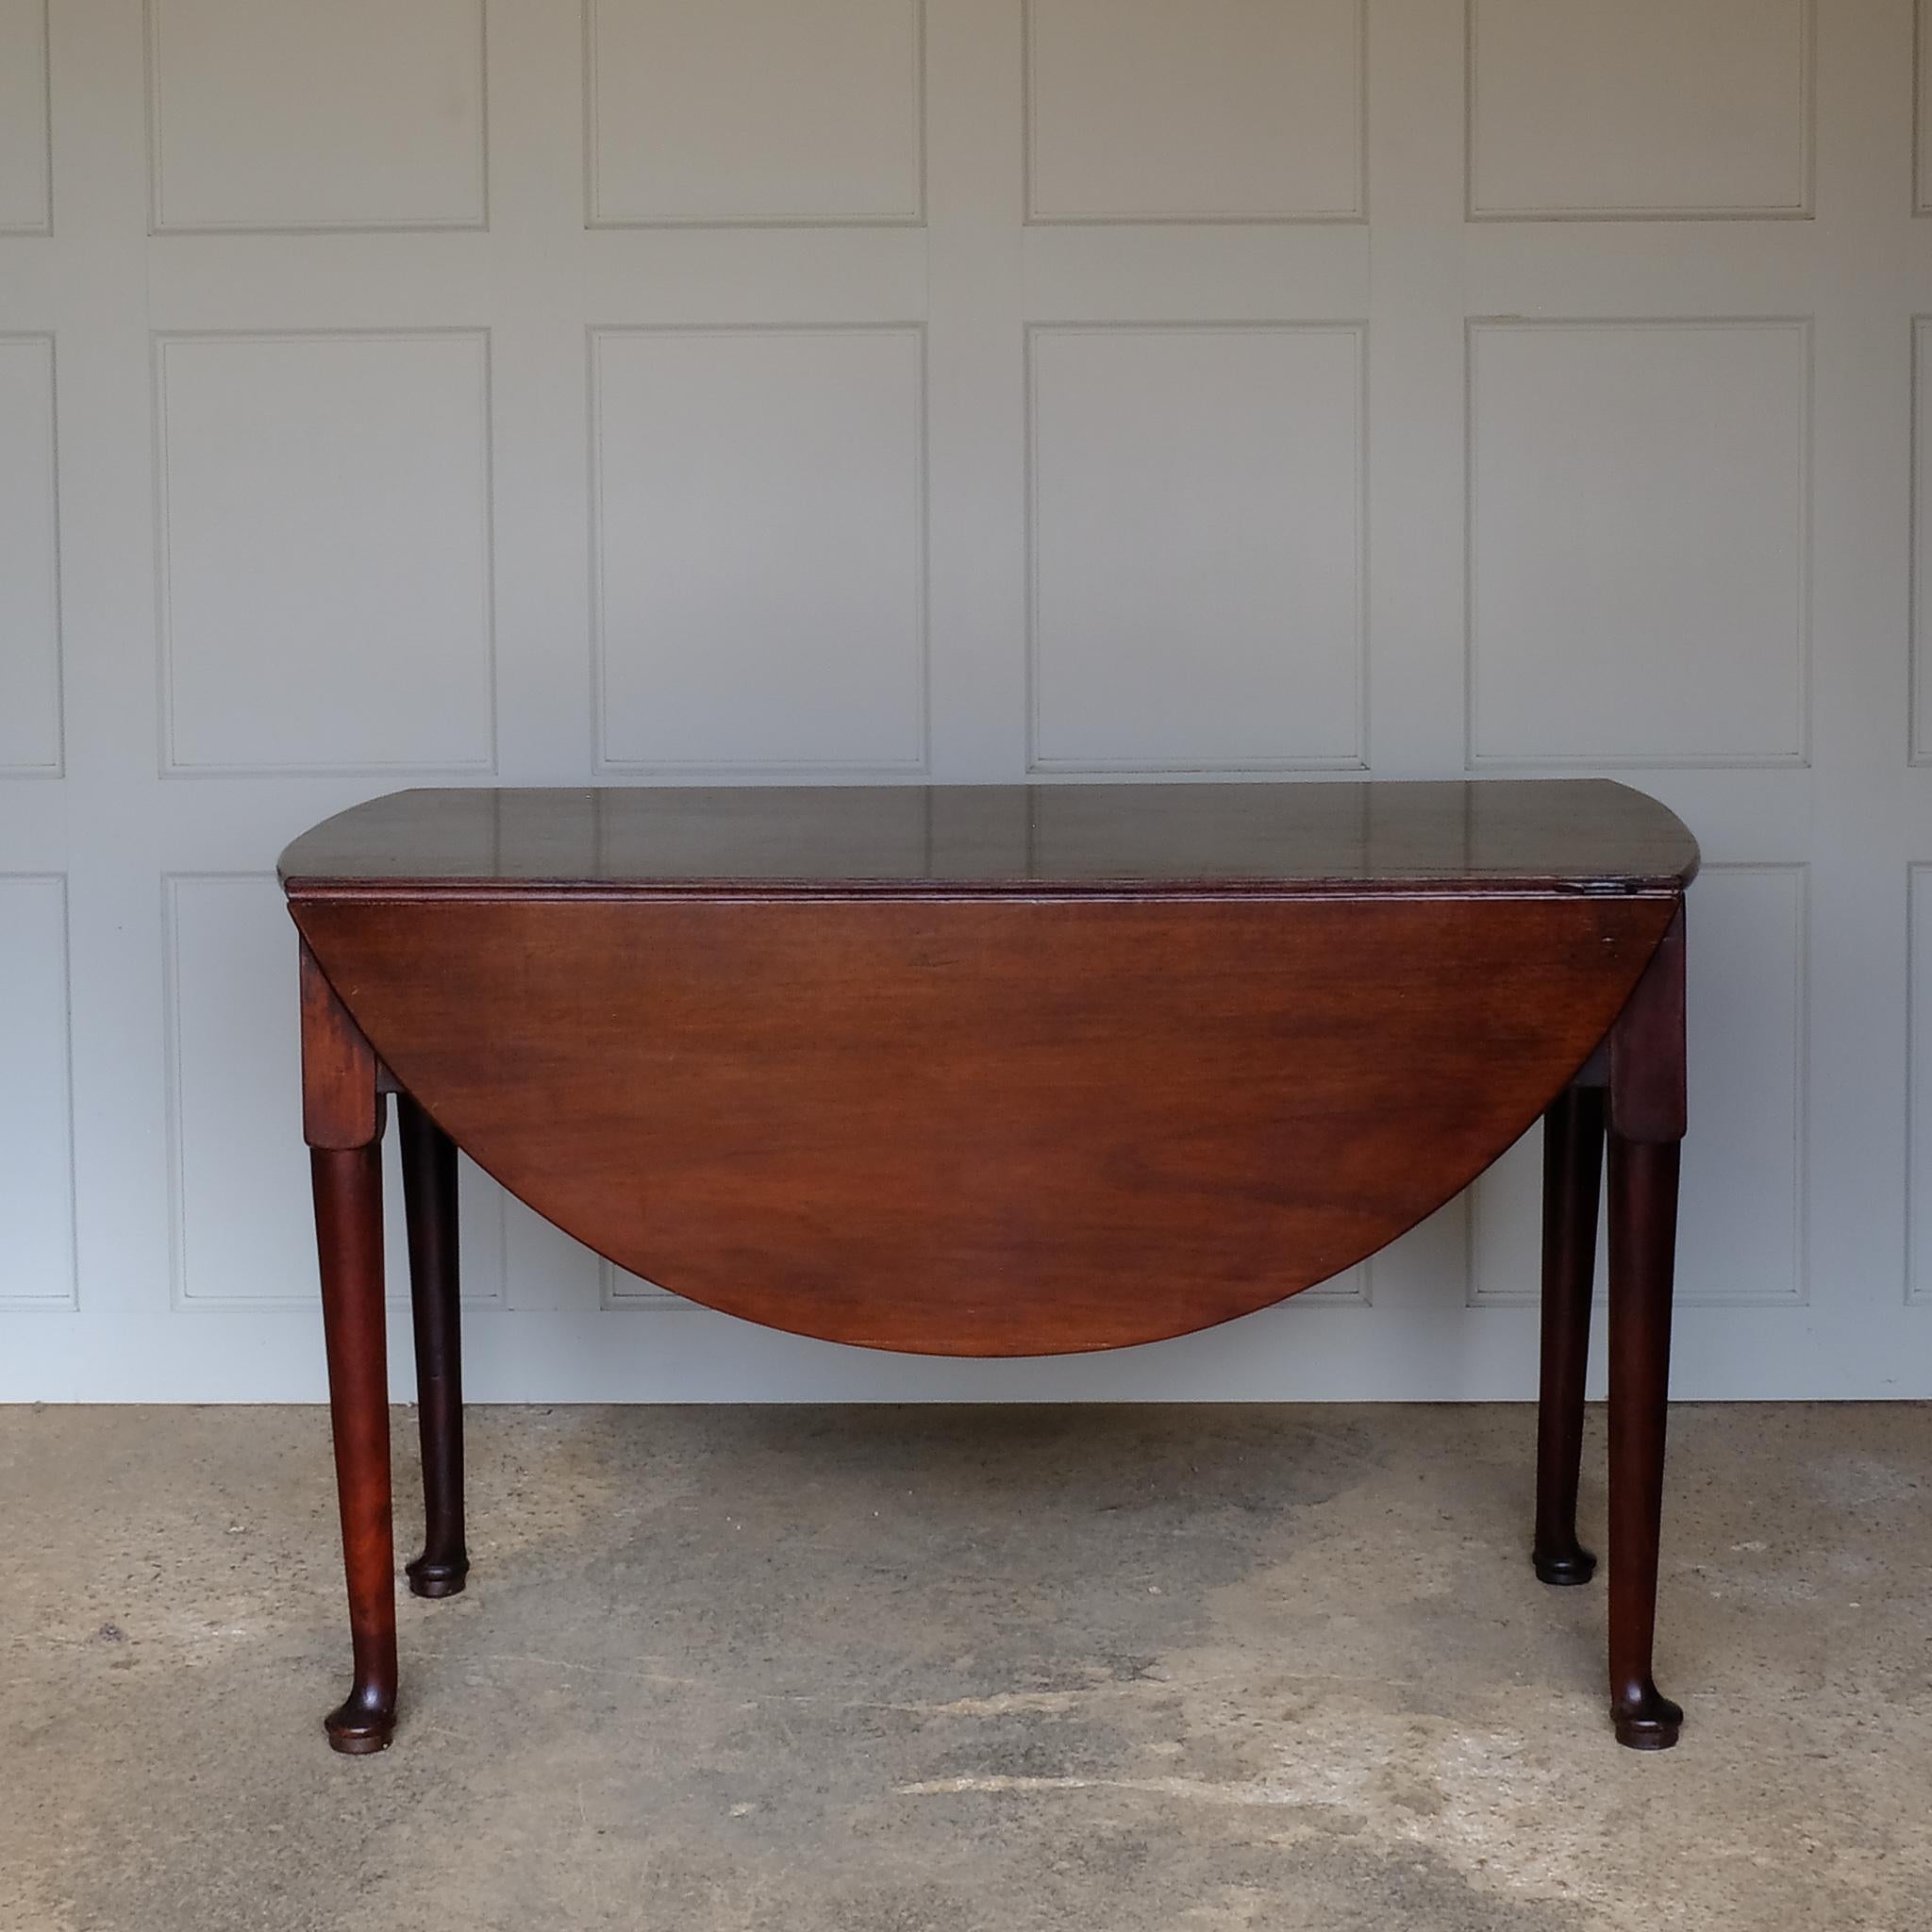 A George III mahogany oval drop leaf table, standing on elegant cabriole legs. A lovely example with a delightful patina throughout in very good condition. Perfect as a dining, side or hall table. 

Date: 18th century
Height:  71.5 cm
Width:   114